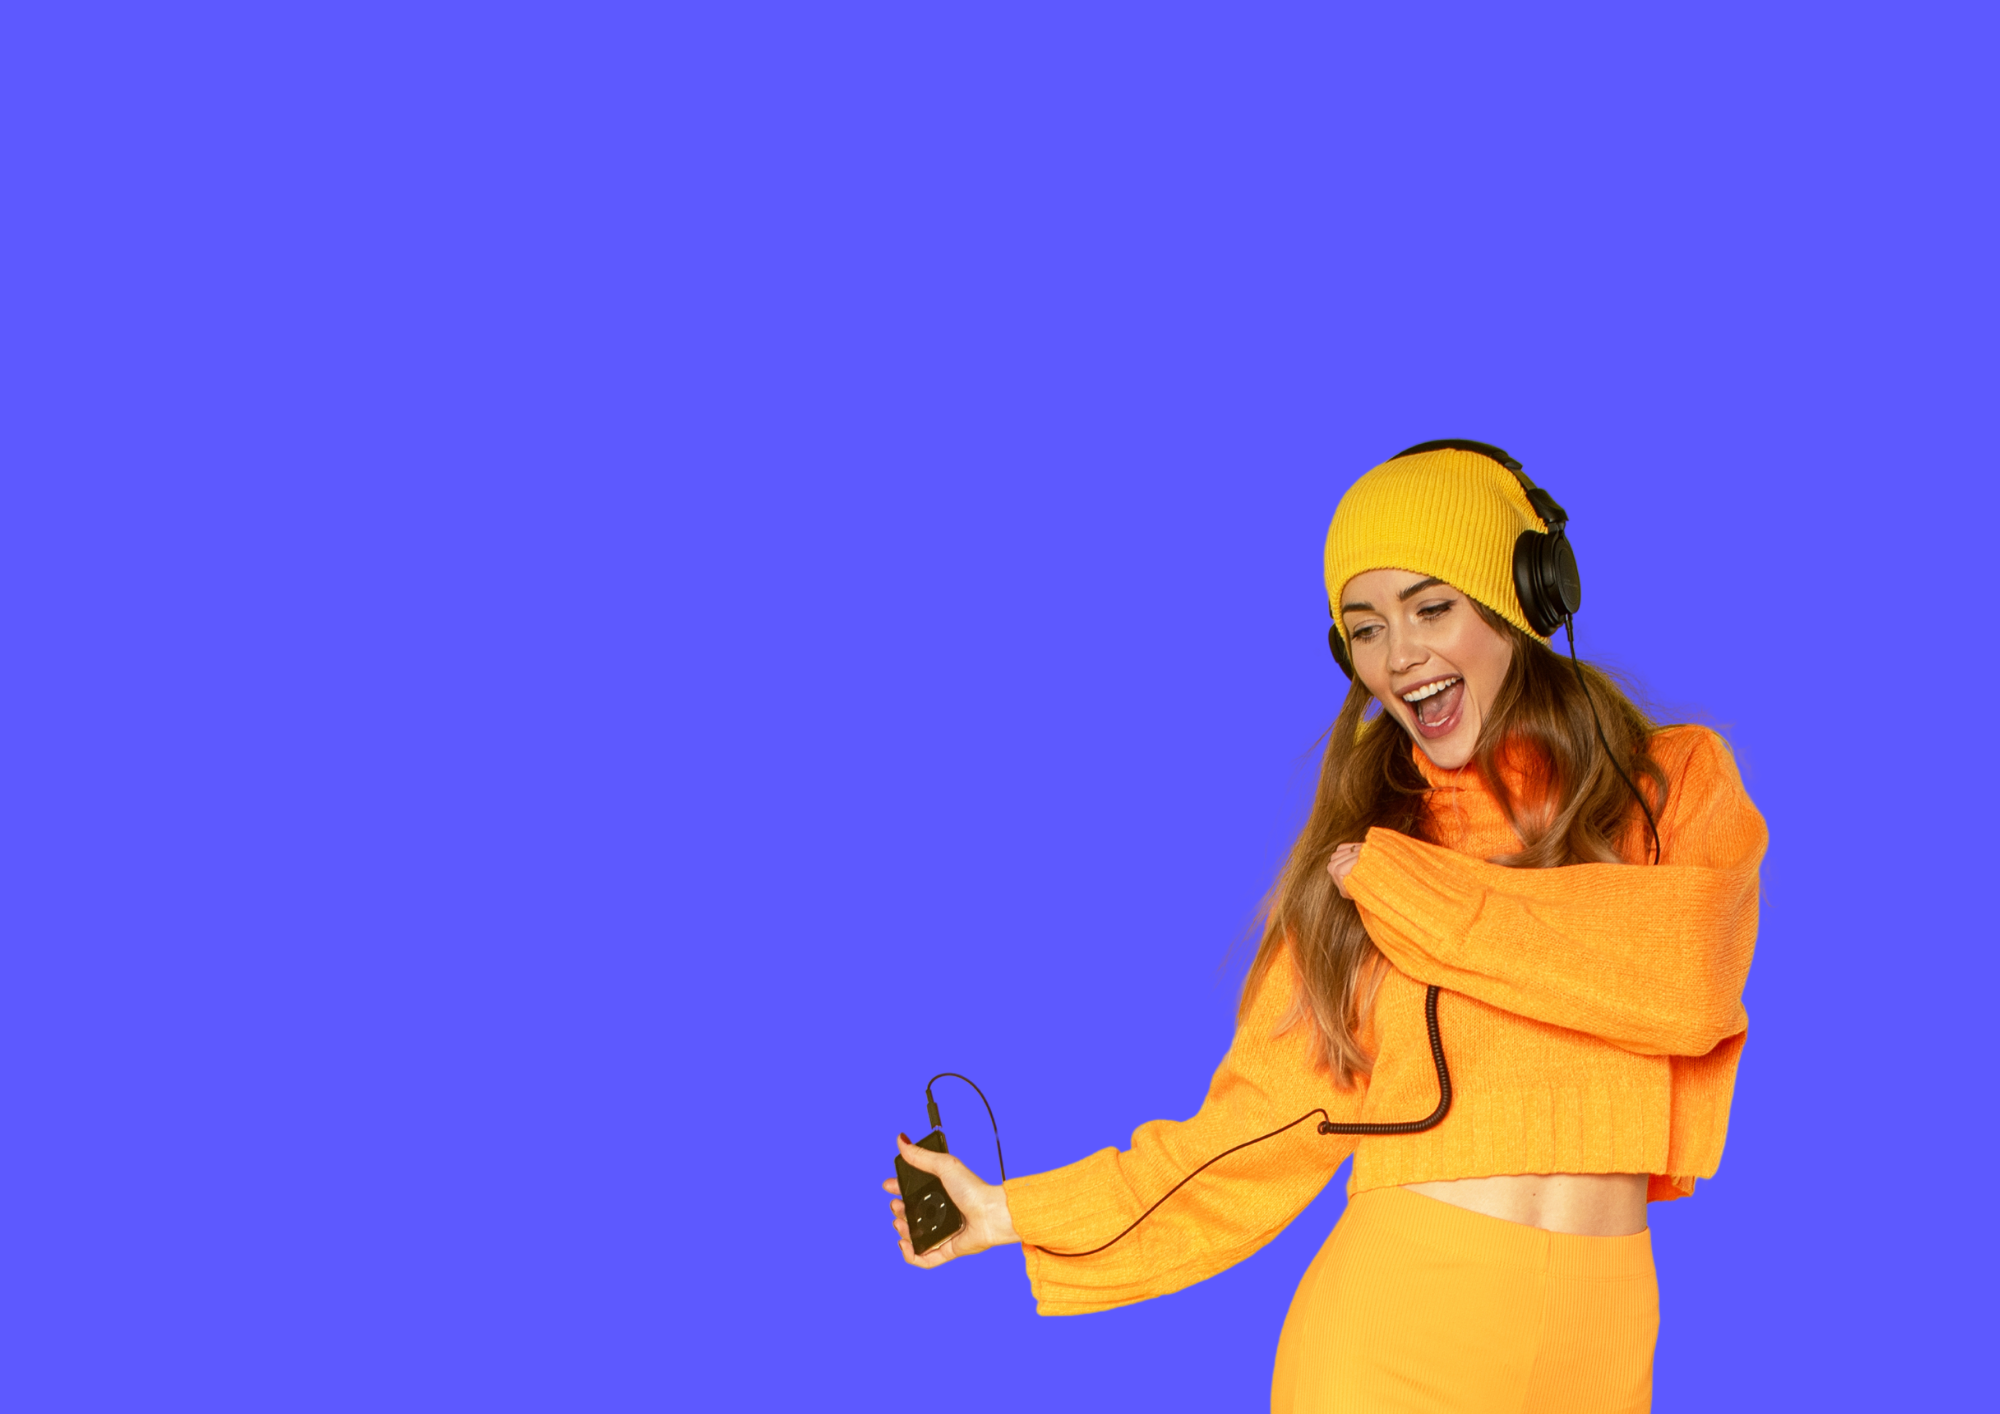 Woman in orange outfit is dancing to music. Blue background.